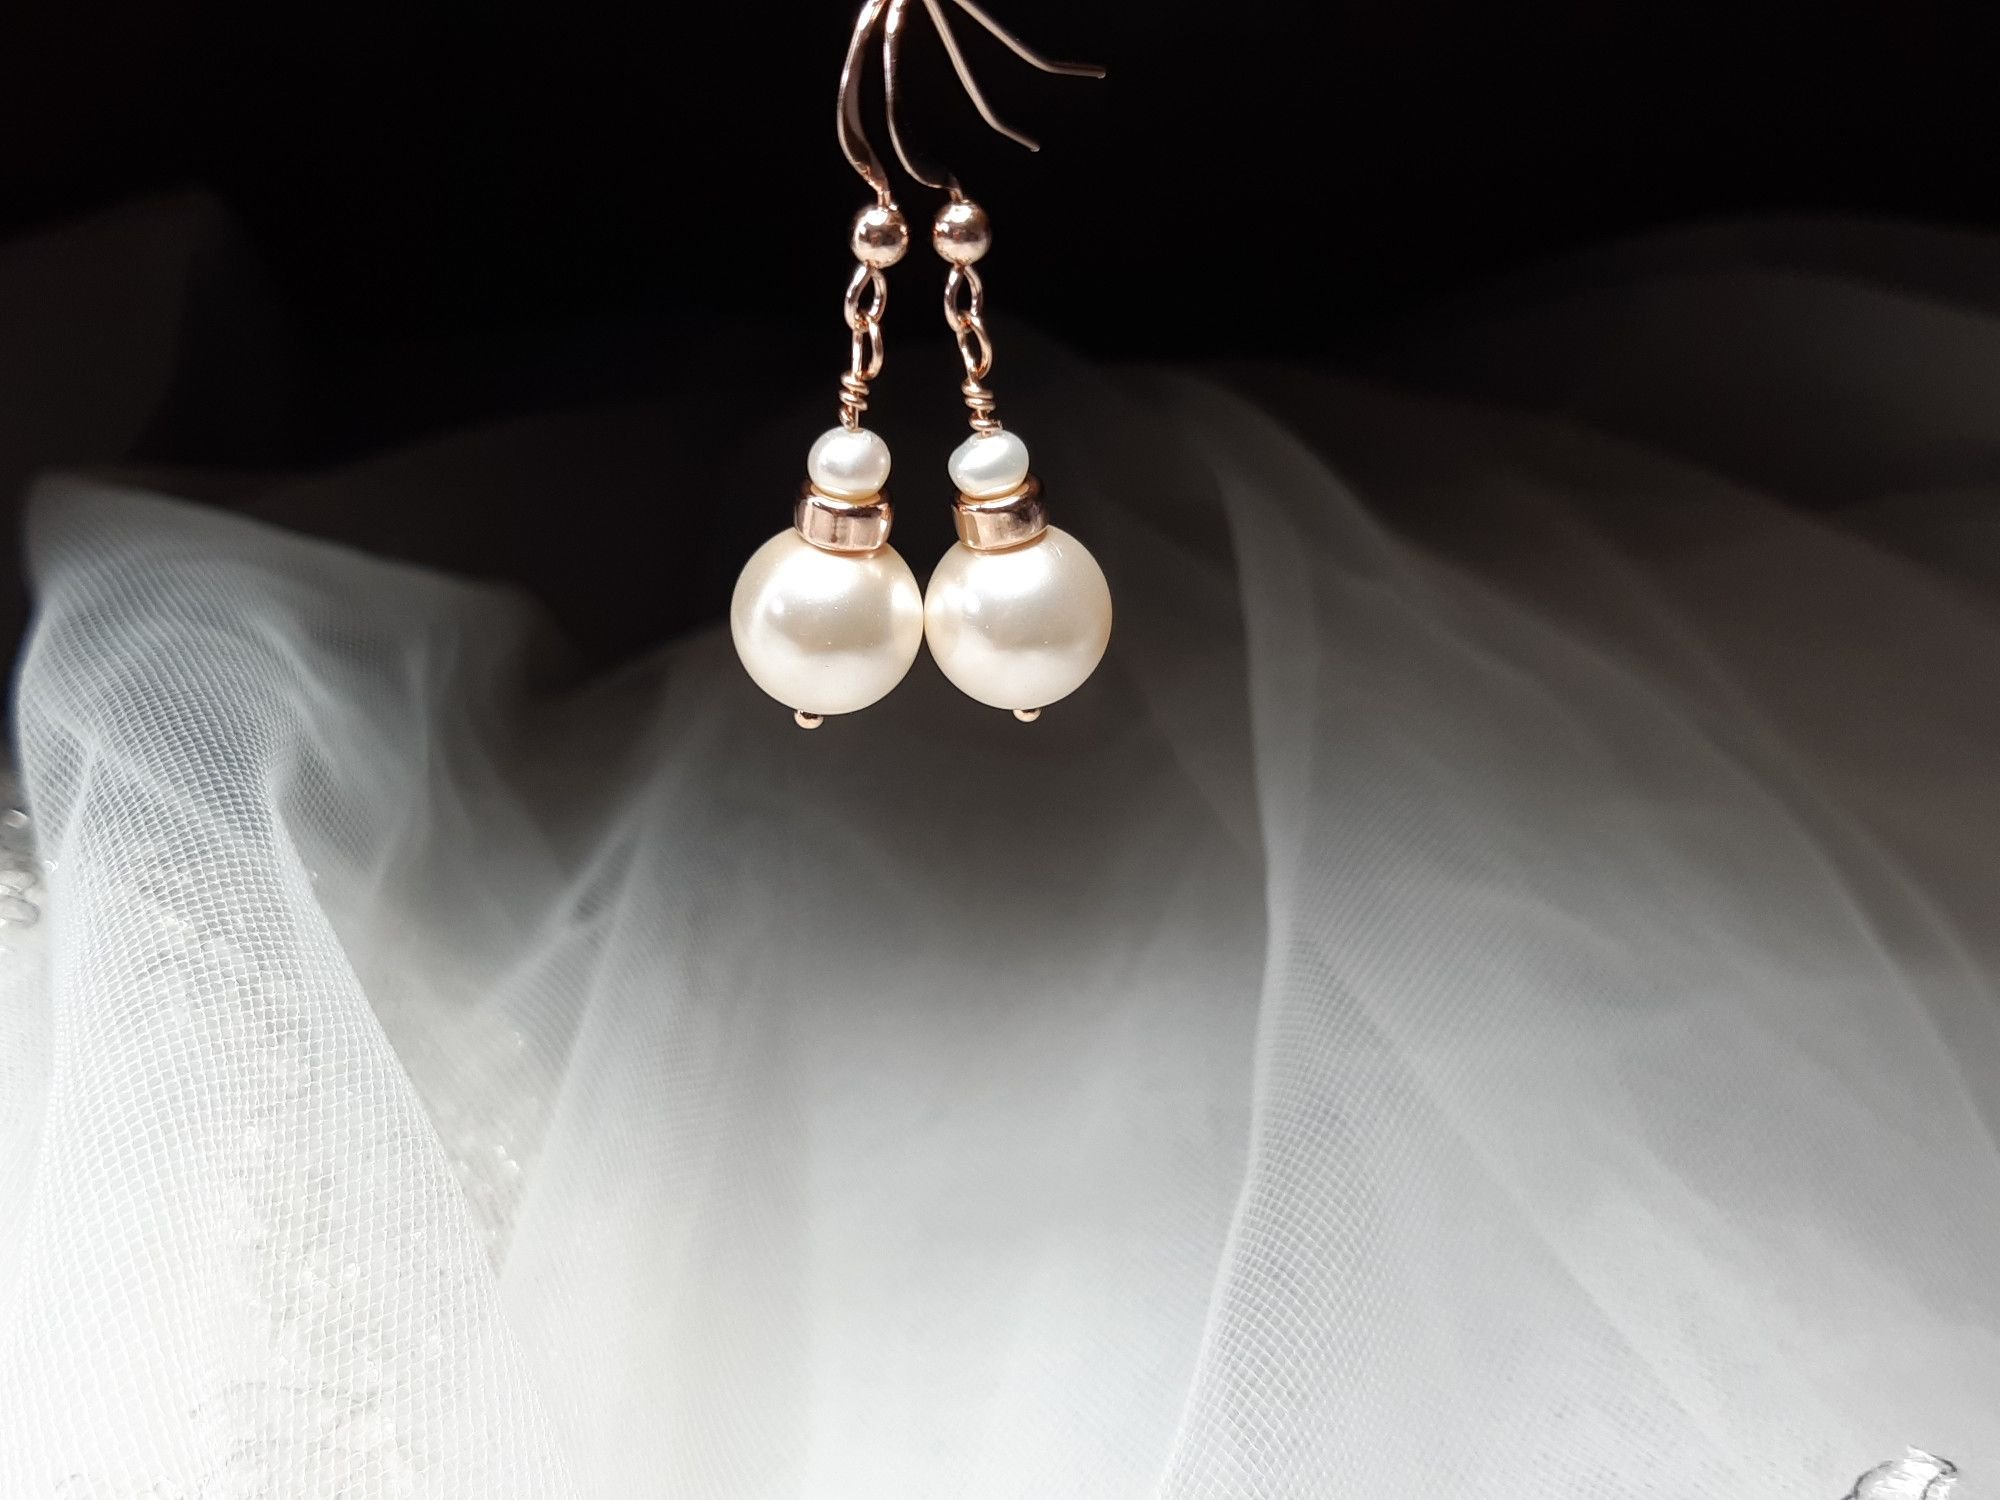 Occasion-bridal-wedding-pearl earrings with rose gold-6.jpg